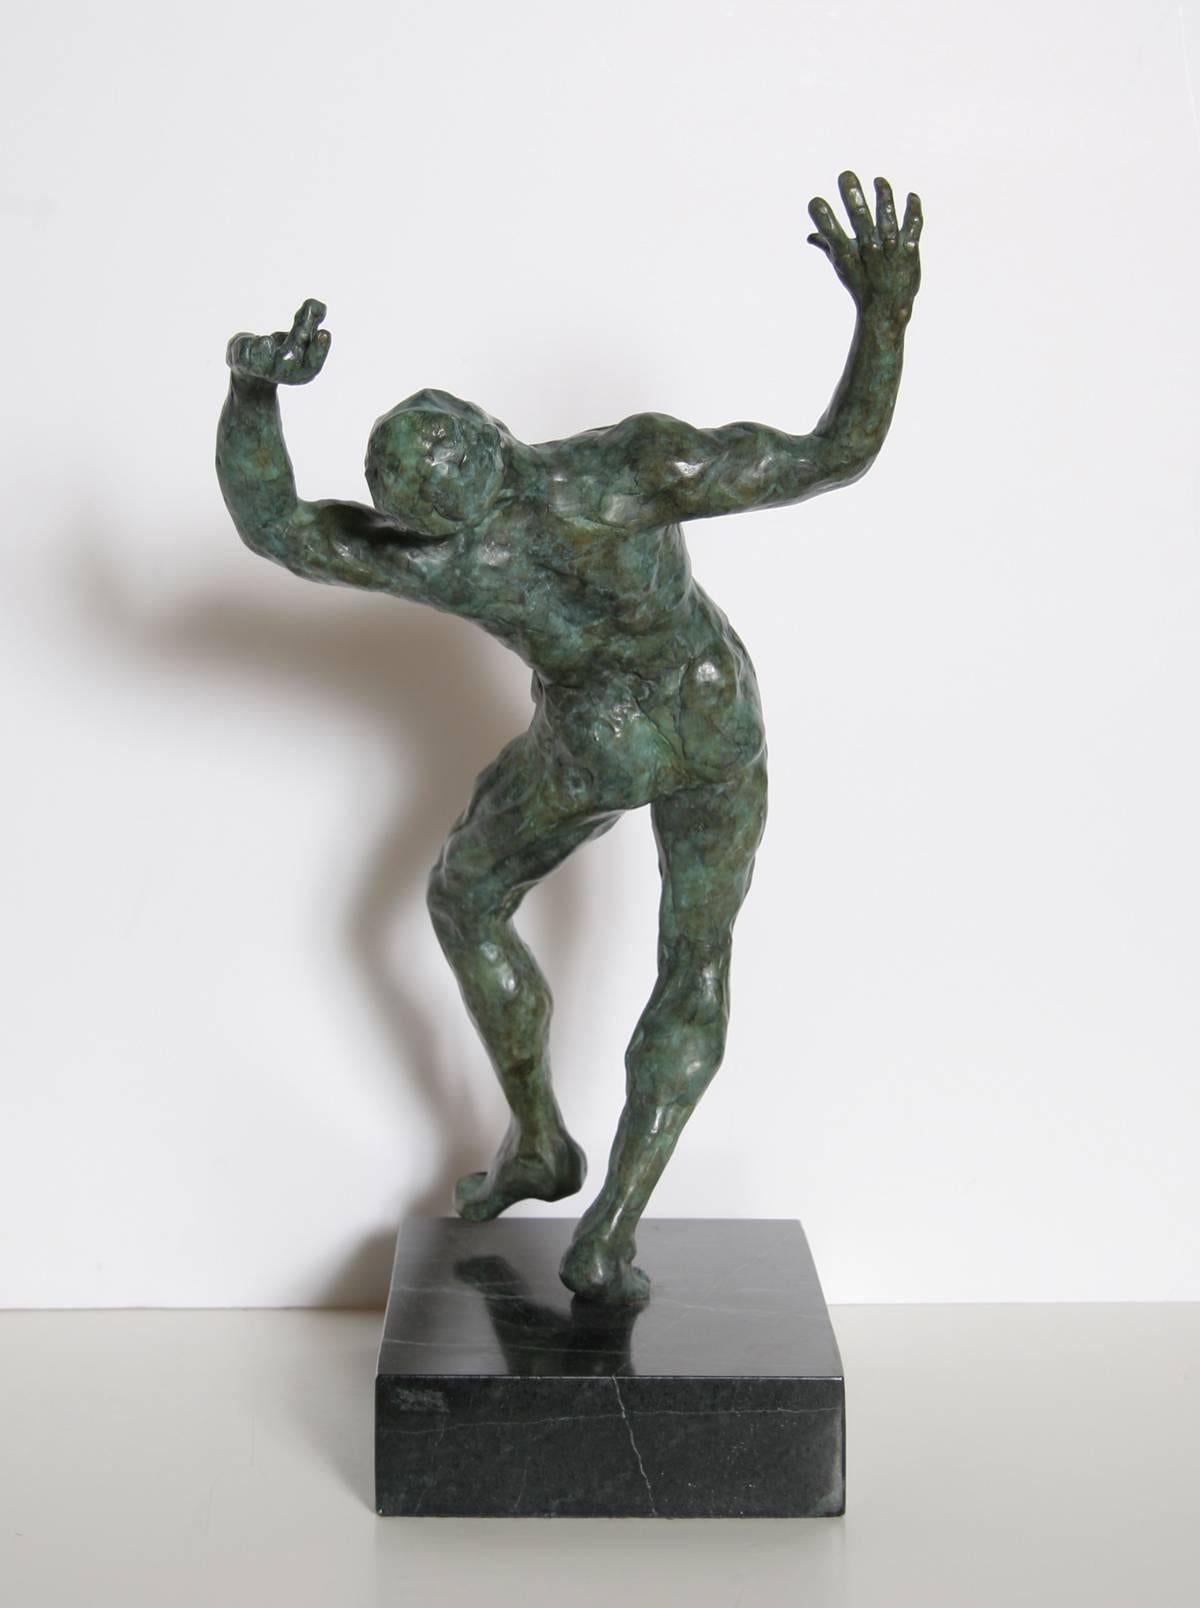 Artist: Anthony Quinn, American (1915 - 2001)
Title:	Spirit of Zorba
Year: 1984 
Medium:	Bronze Sculpture, signature, date and edition inscribed
Edition: 49
Size:	16.5 x 9.5 x 8.5 inches
Including Base: 18.5 inches